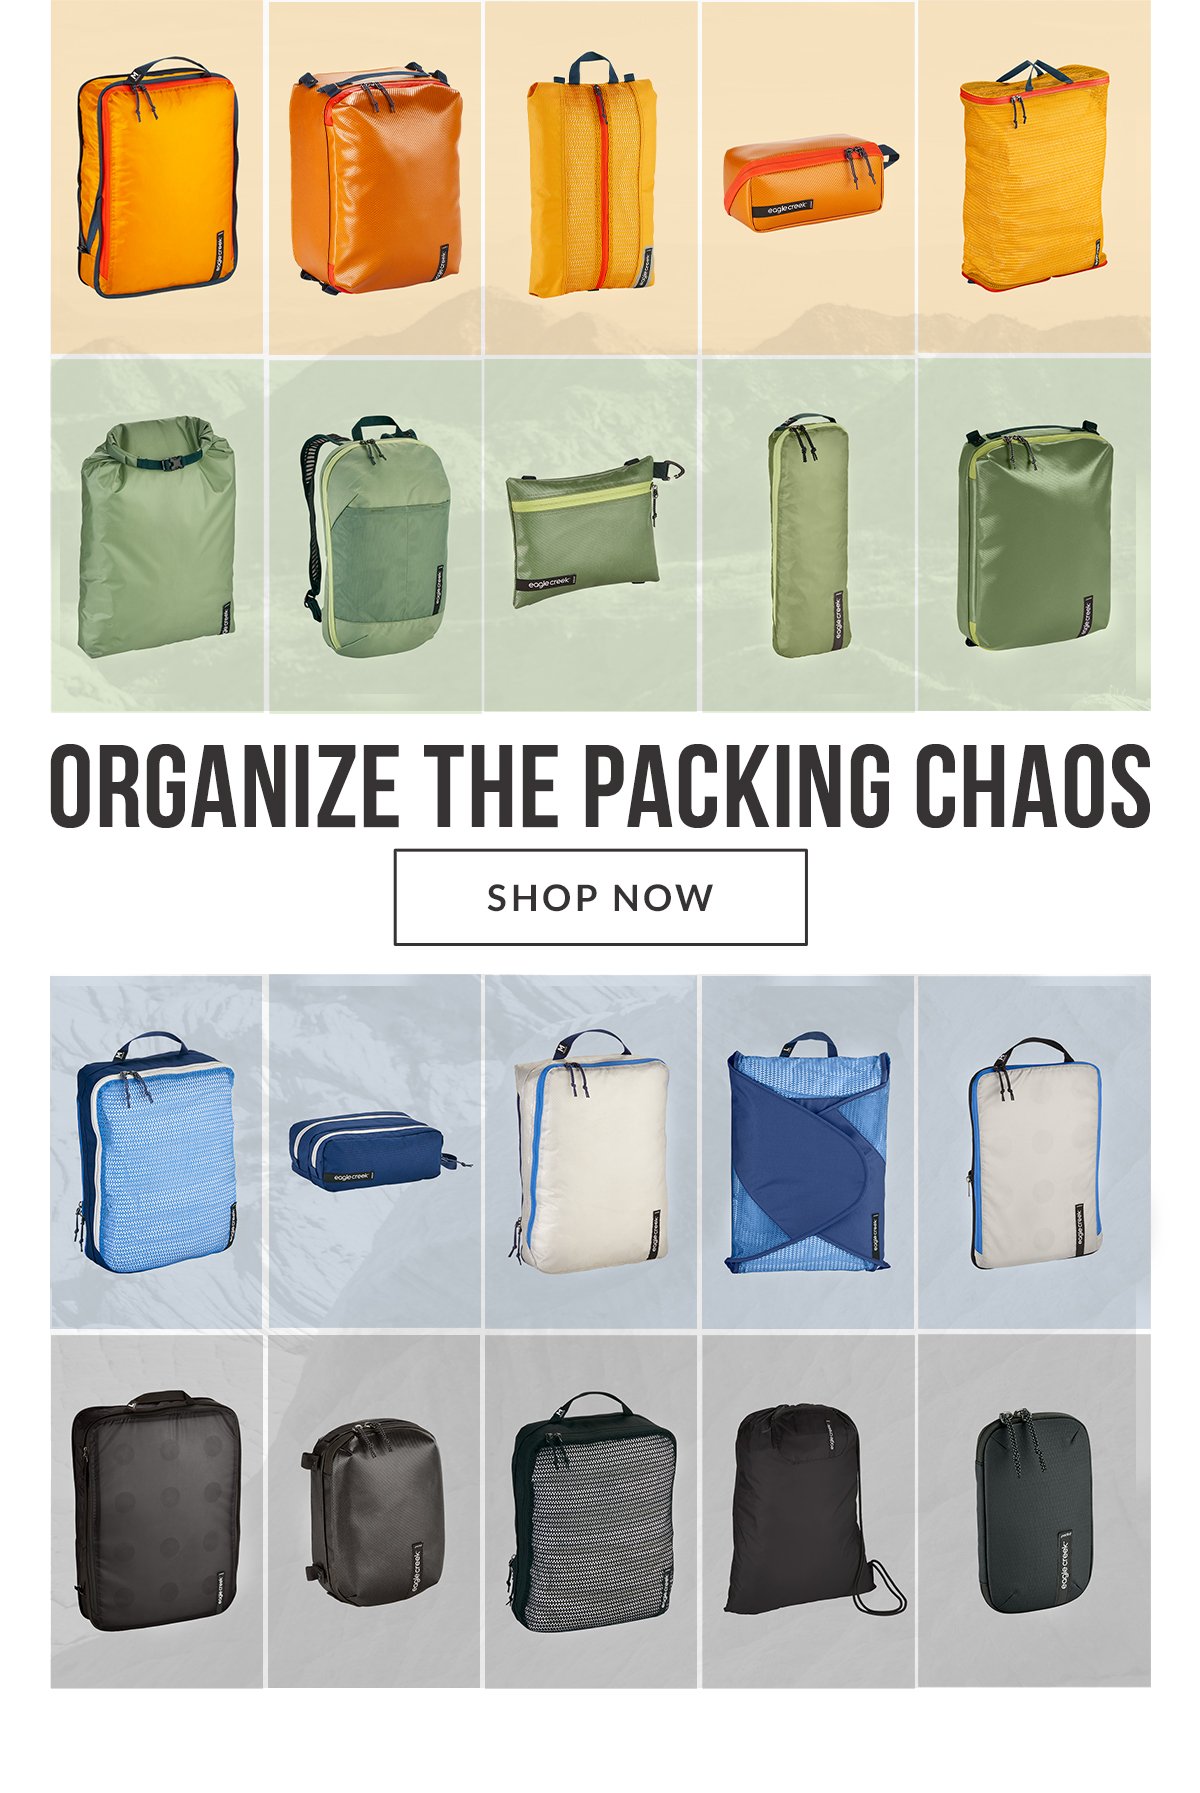 Organize the Packing Chaos - Shop Now